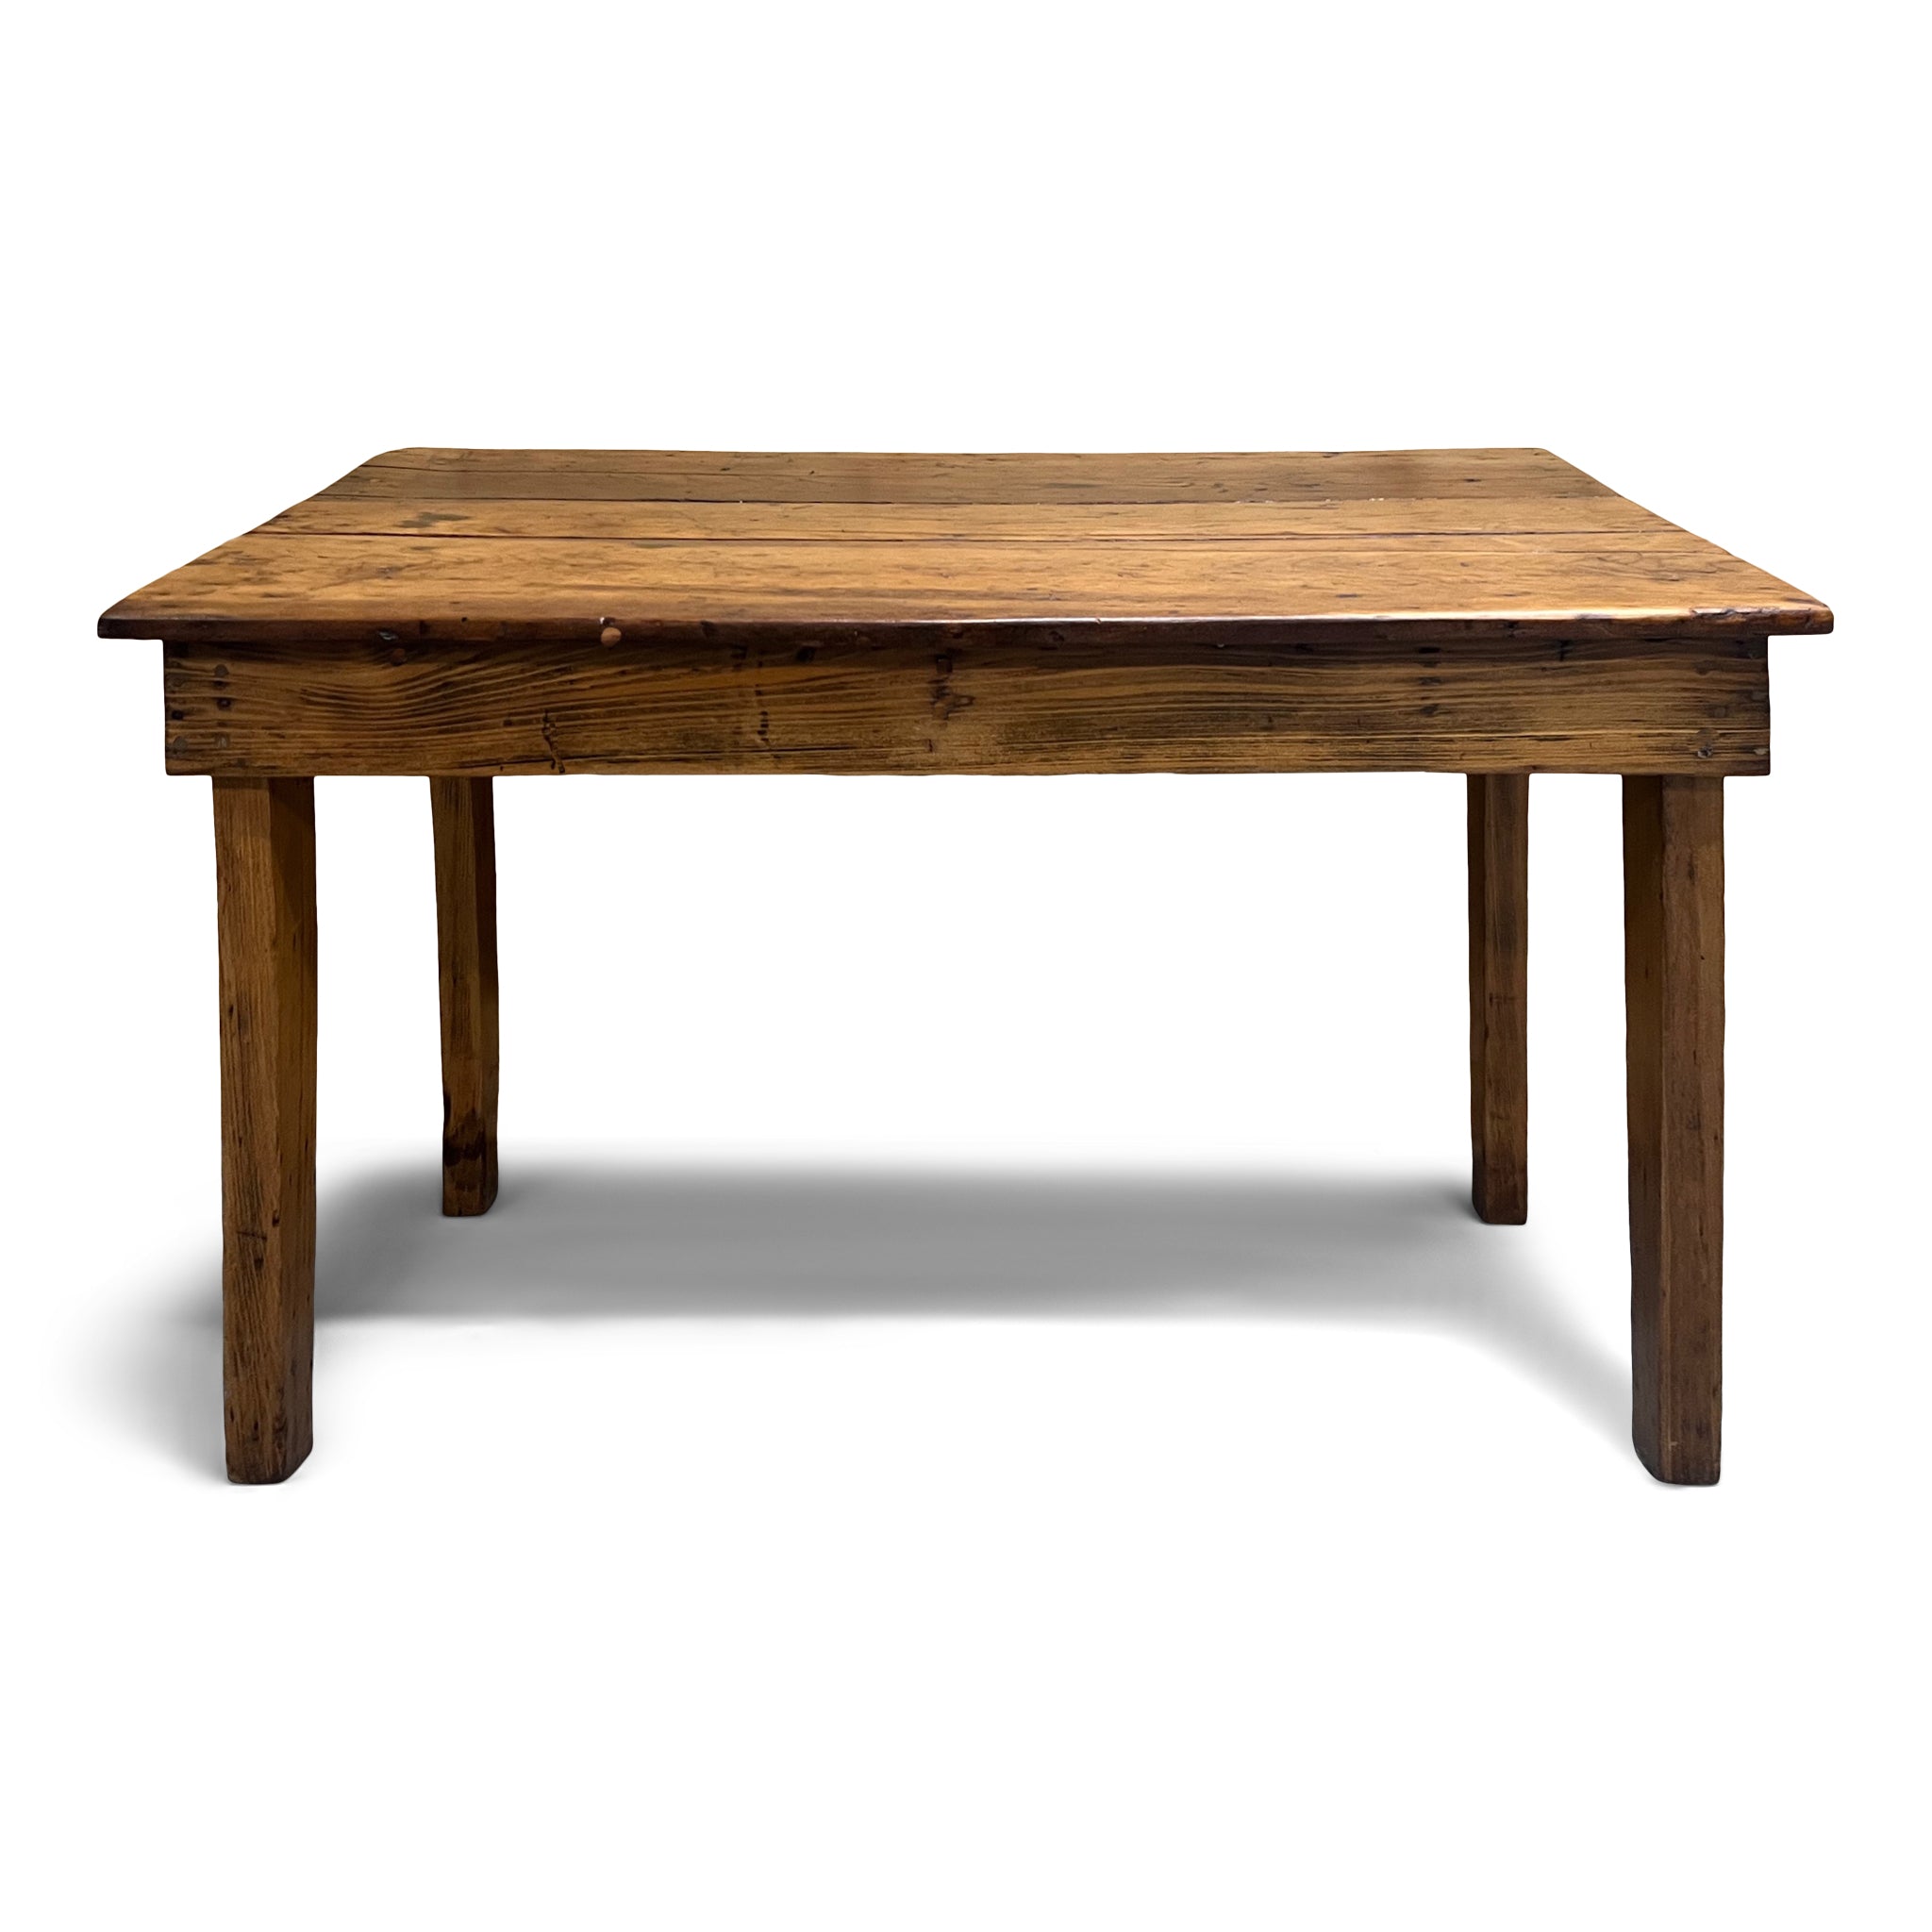 Early Pine Table